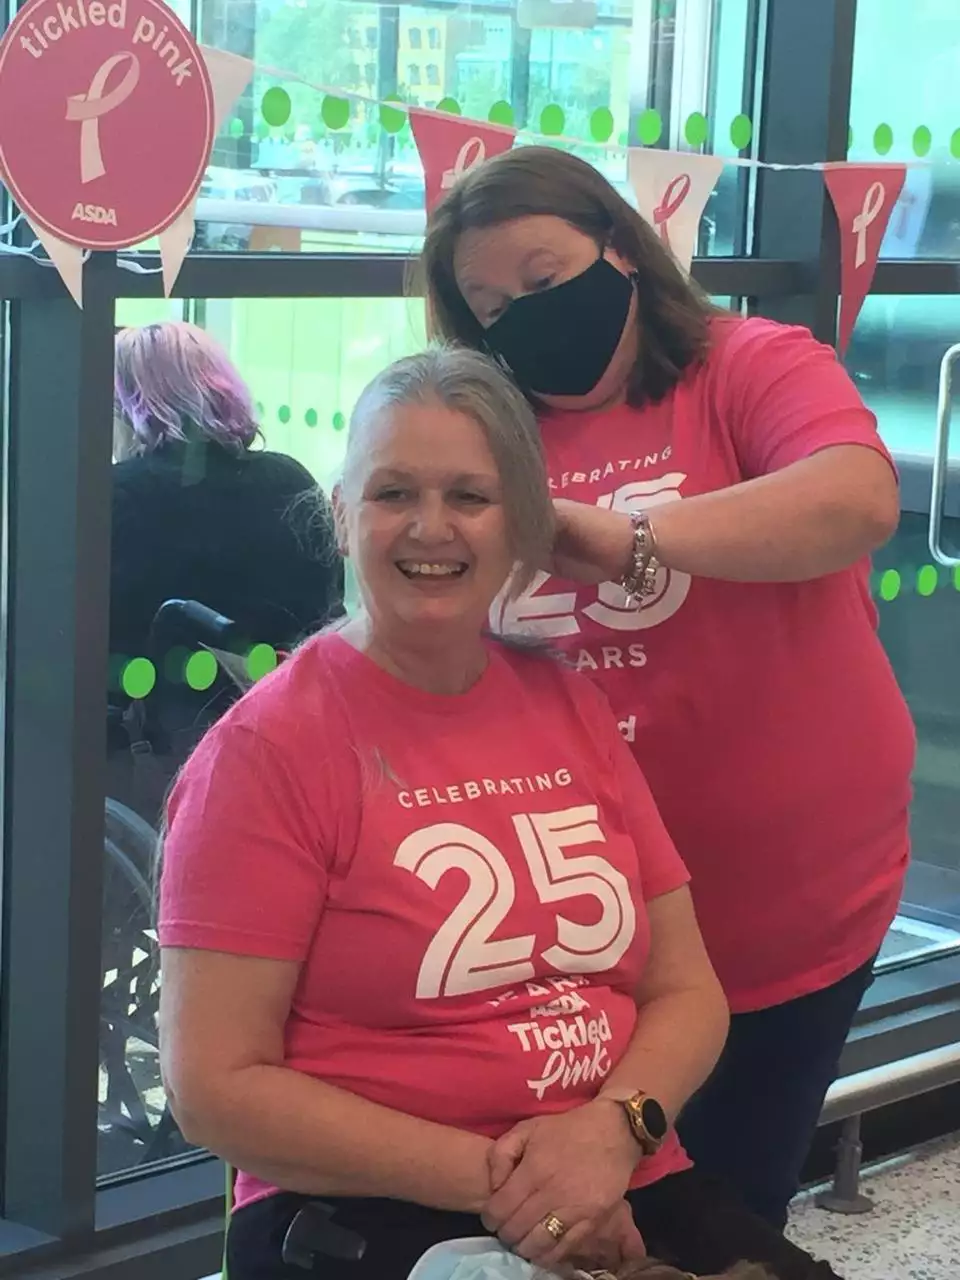 Diana shaves her hair off to raise funds for Tickled Pink  | Asda Gillingham Pier